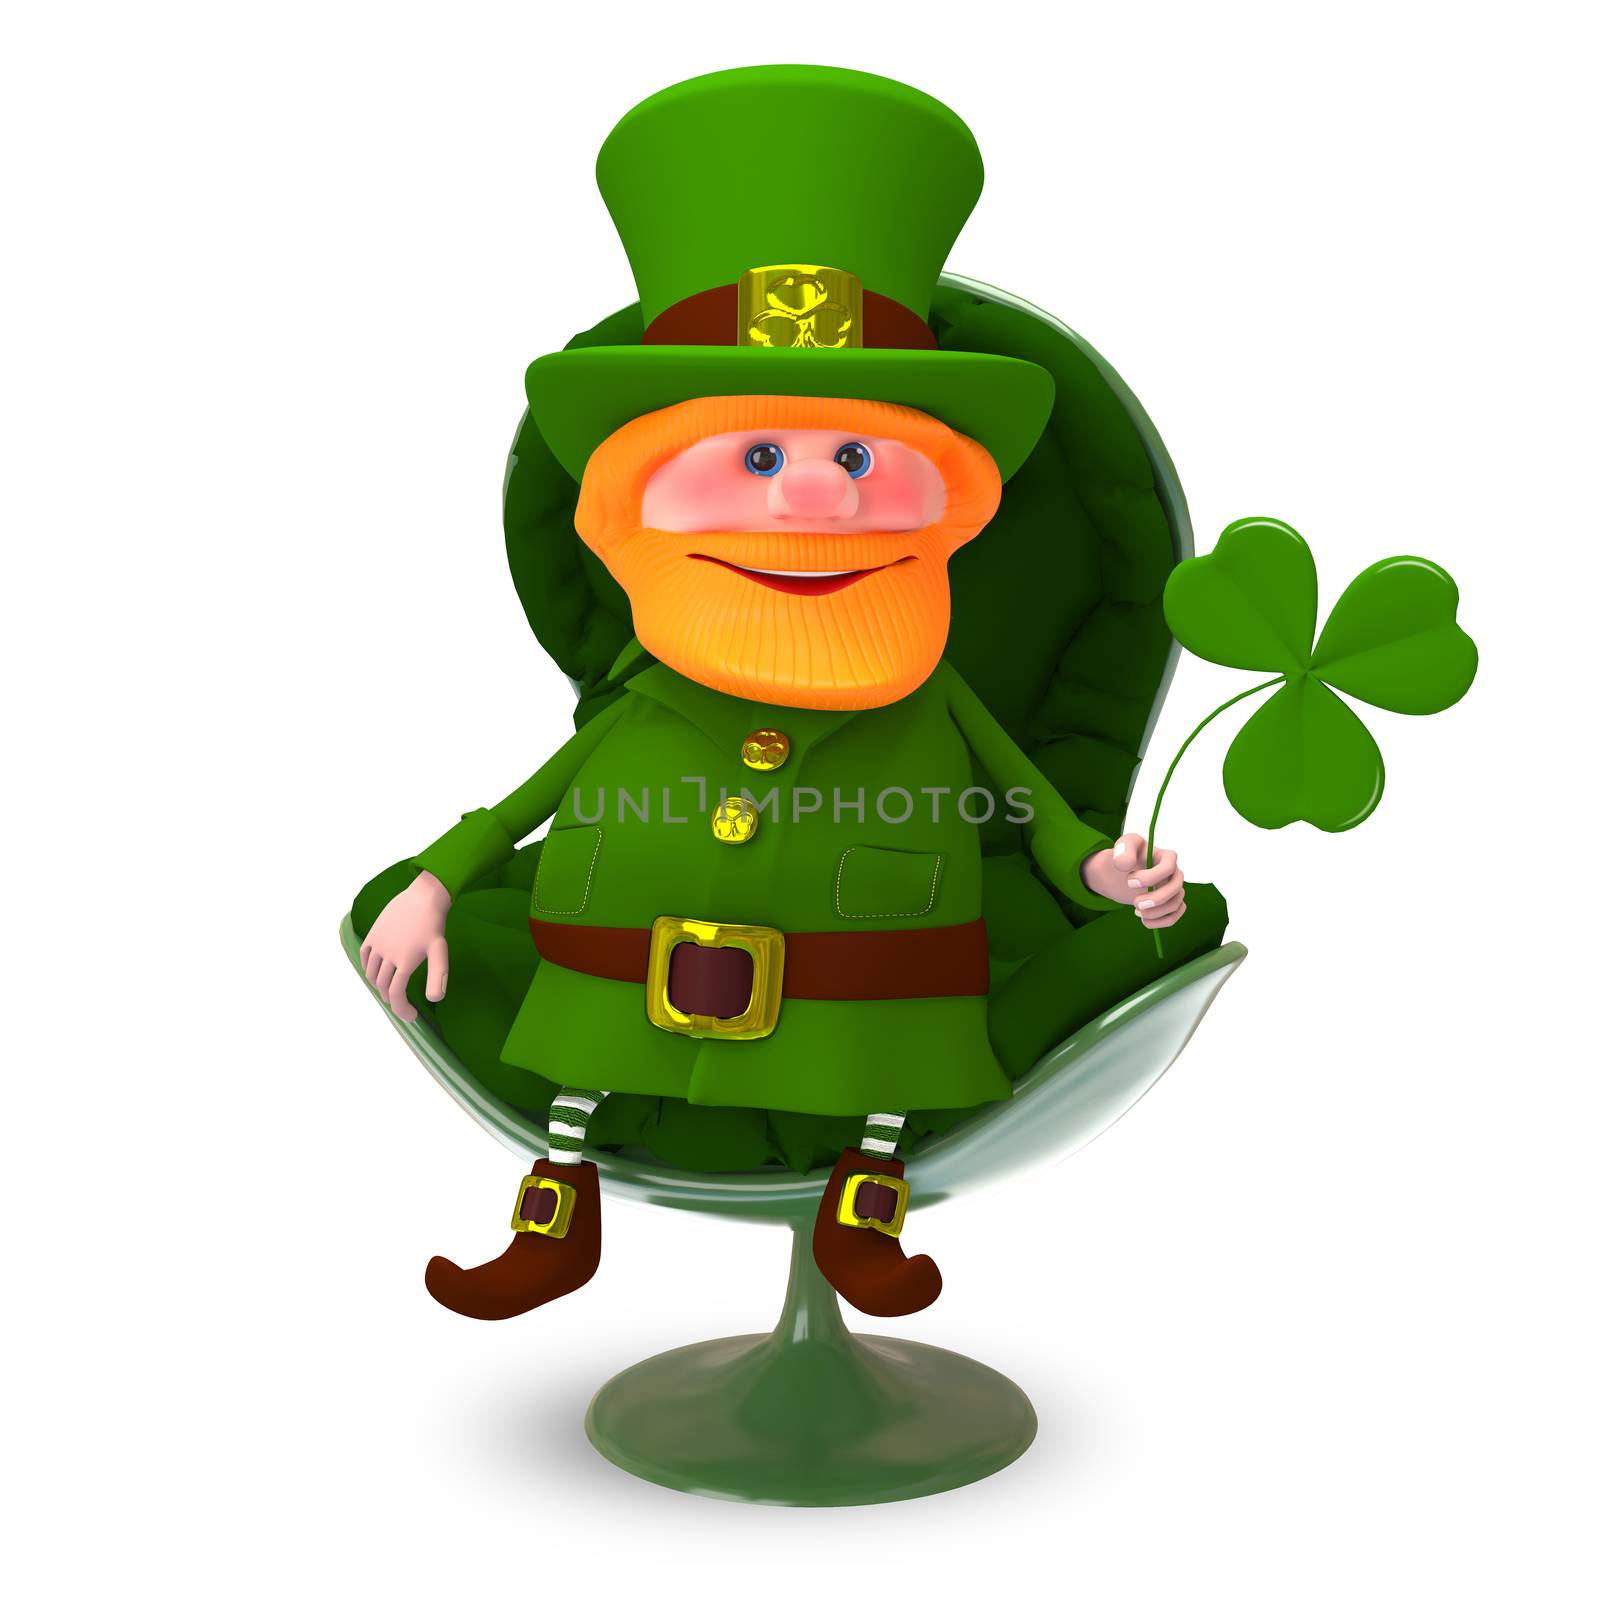 3D Illustration of Saint Patrick with Clover In the Armchair by brux